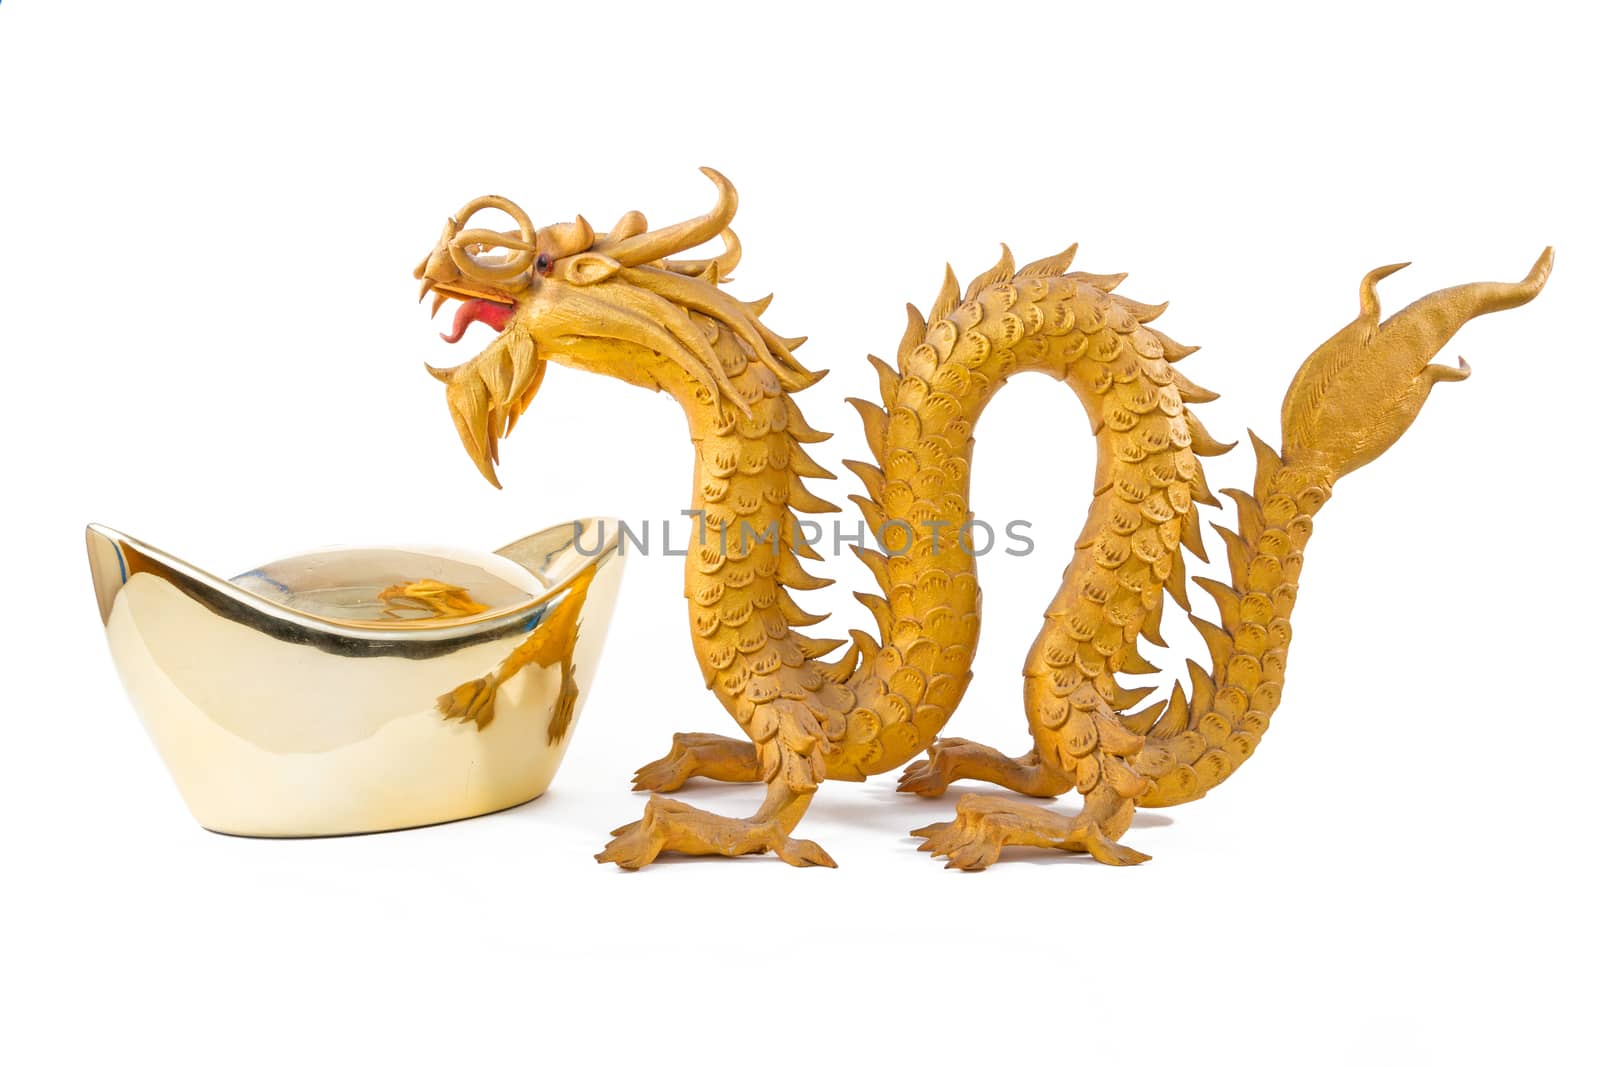 Chinese gold ingot and GoldenDragon isolated on white background by ronnarong